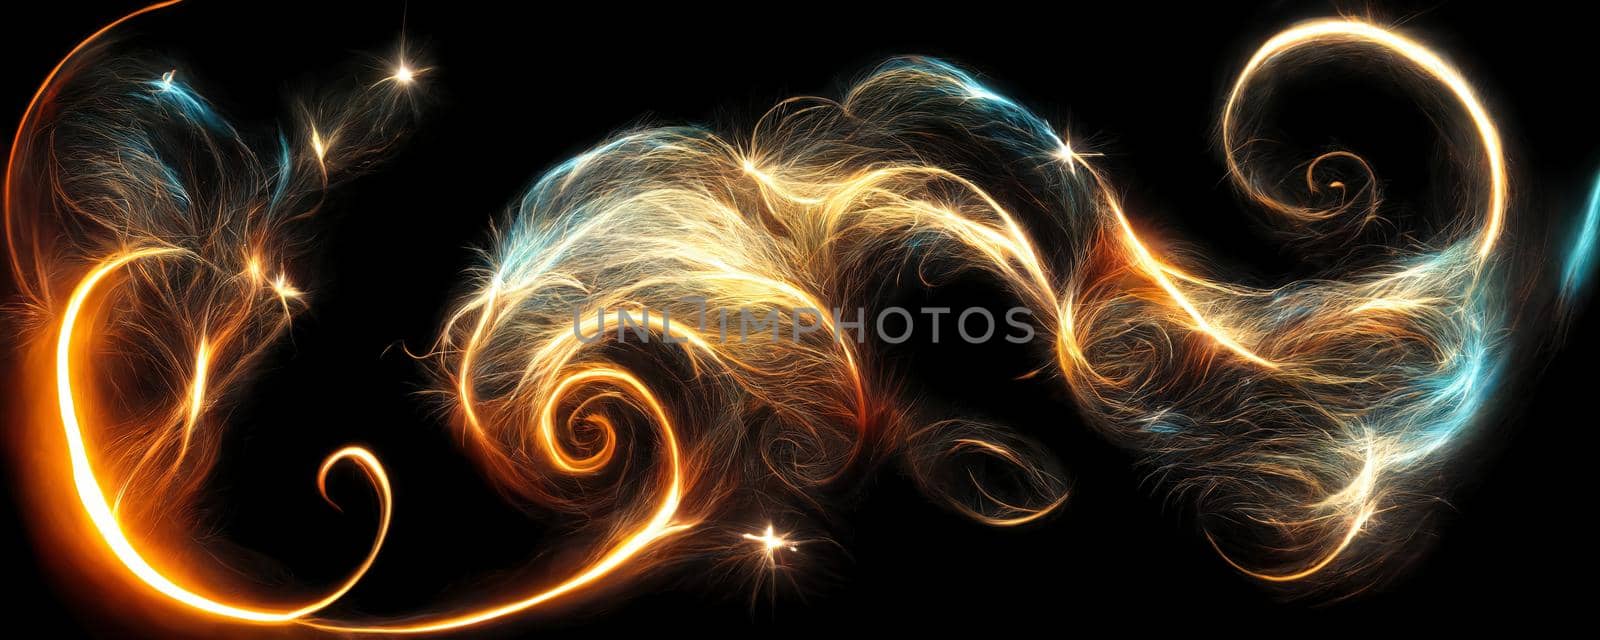 golden sparks in the form of swirls on a black background.